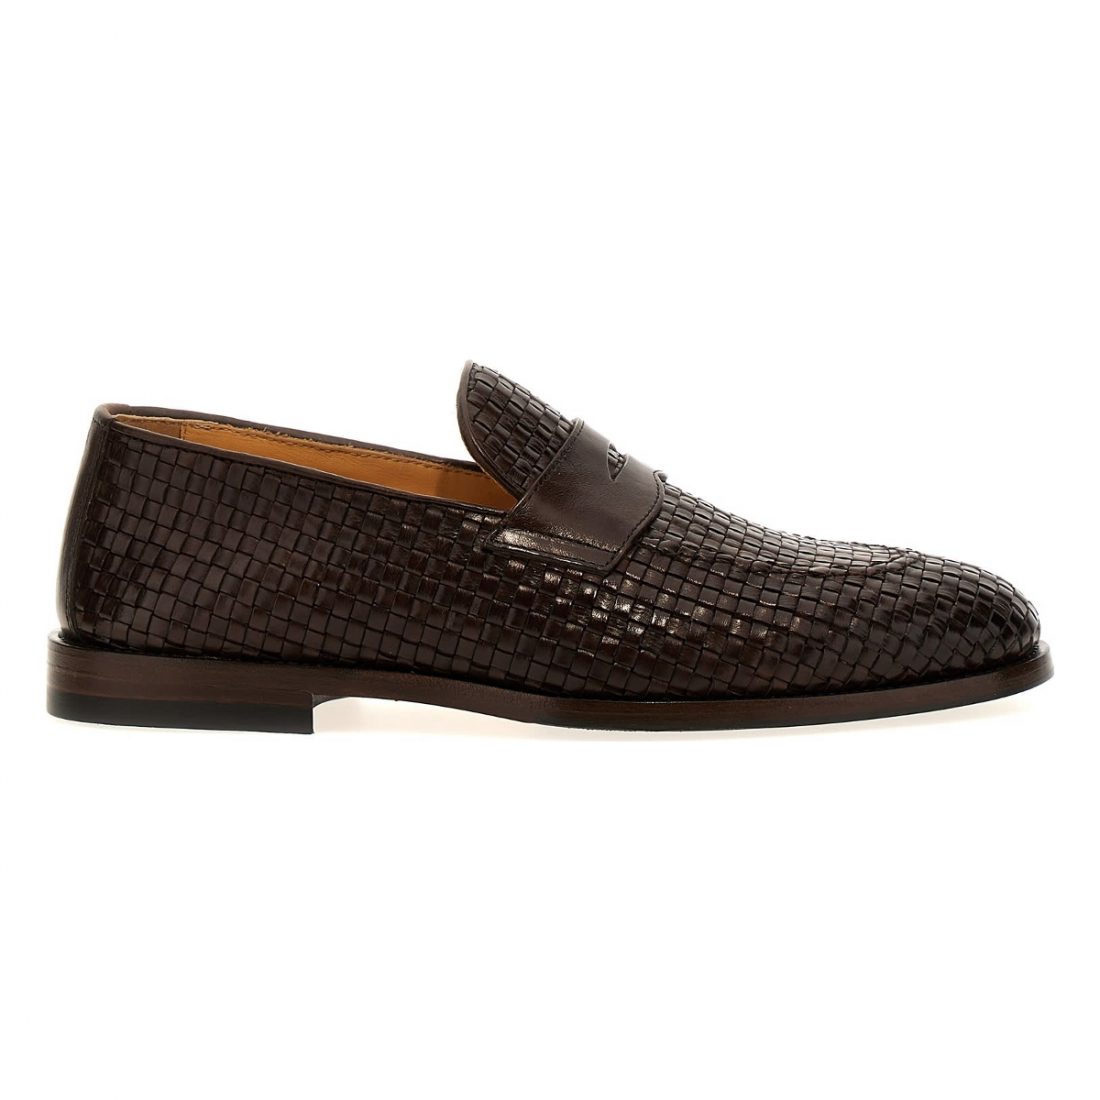 Men's 'Braided' Loafers